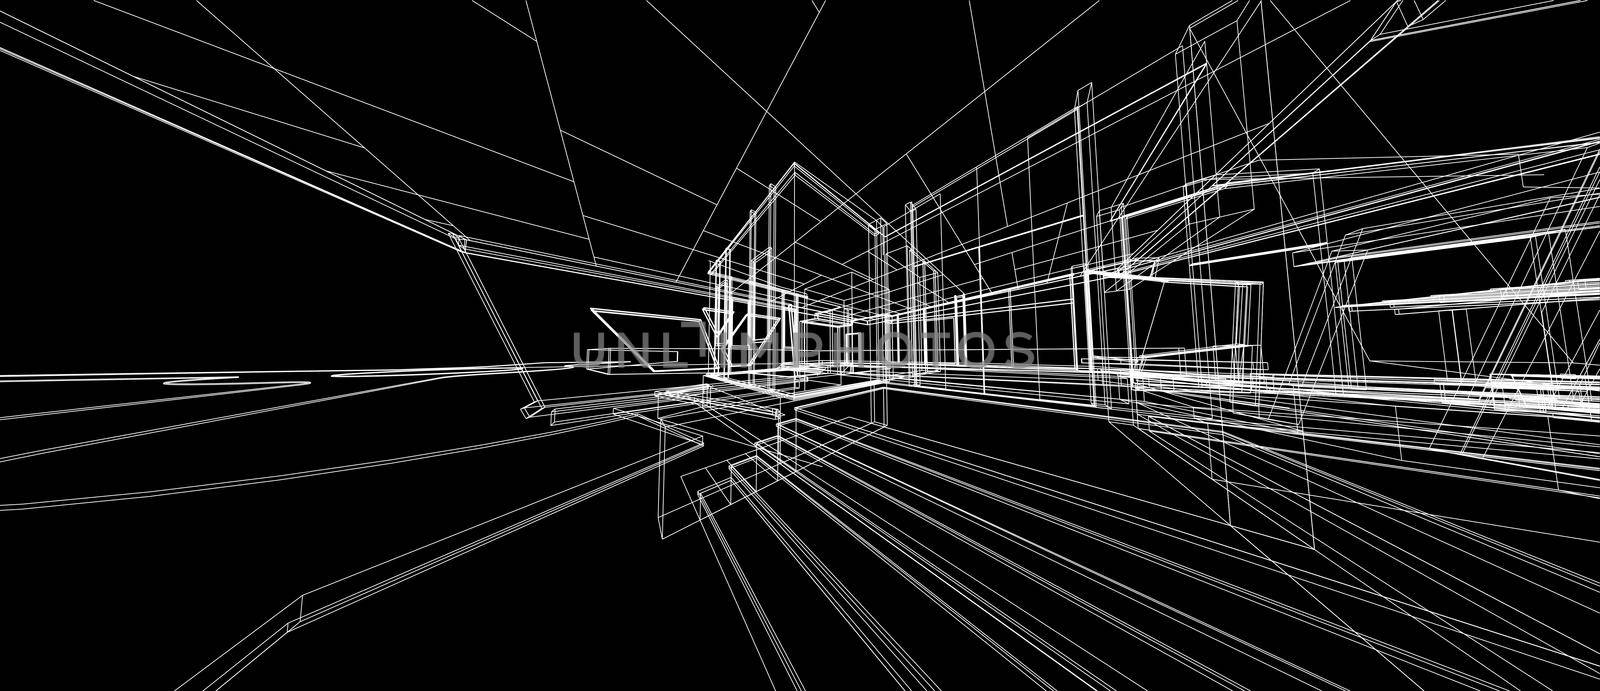 Architecture house space design concept 3d perspective wireframe rendering over black background. For abstract background or wallpaper desktops computer smart technology design architectural theme.